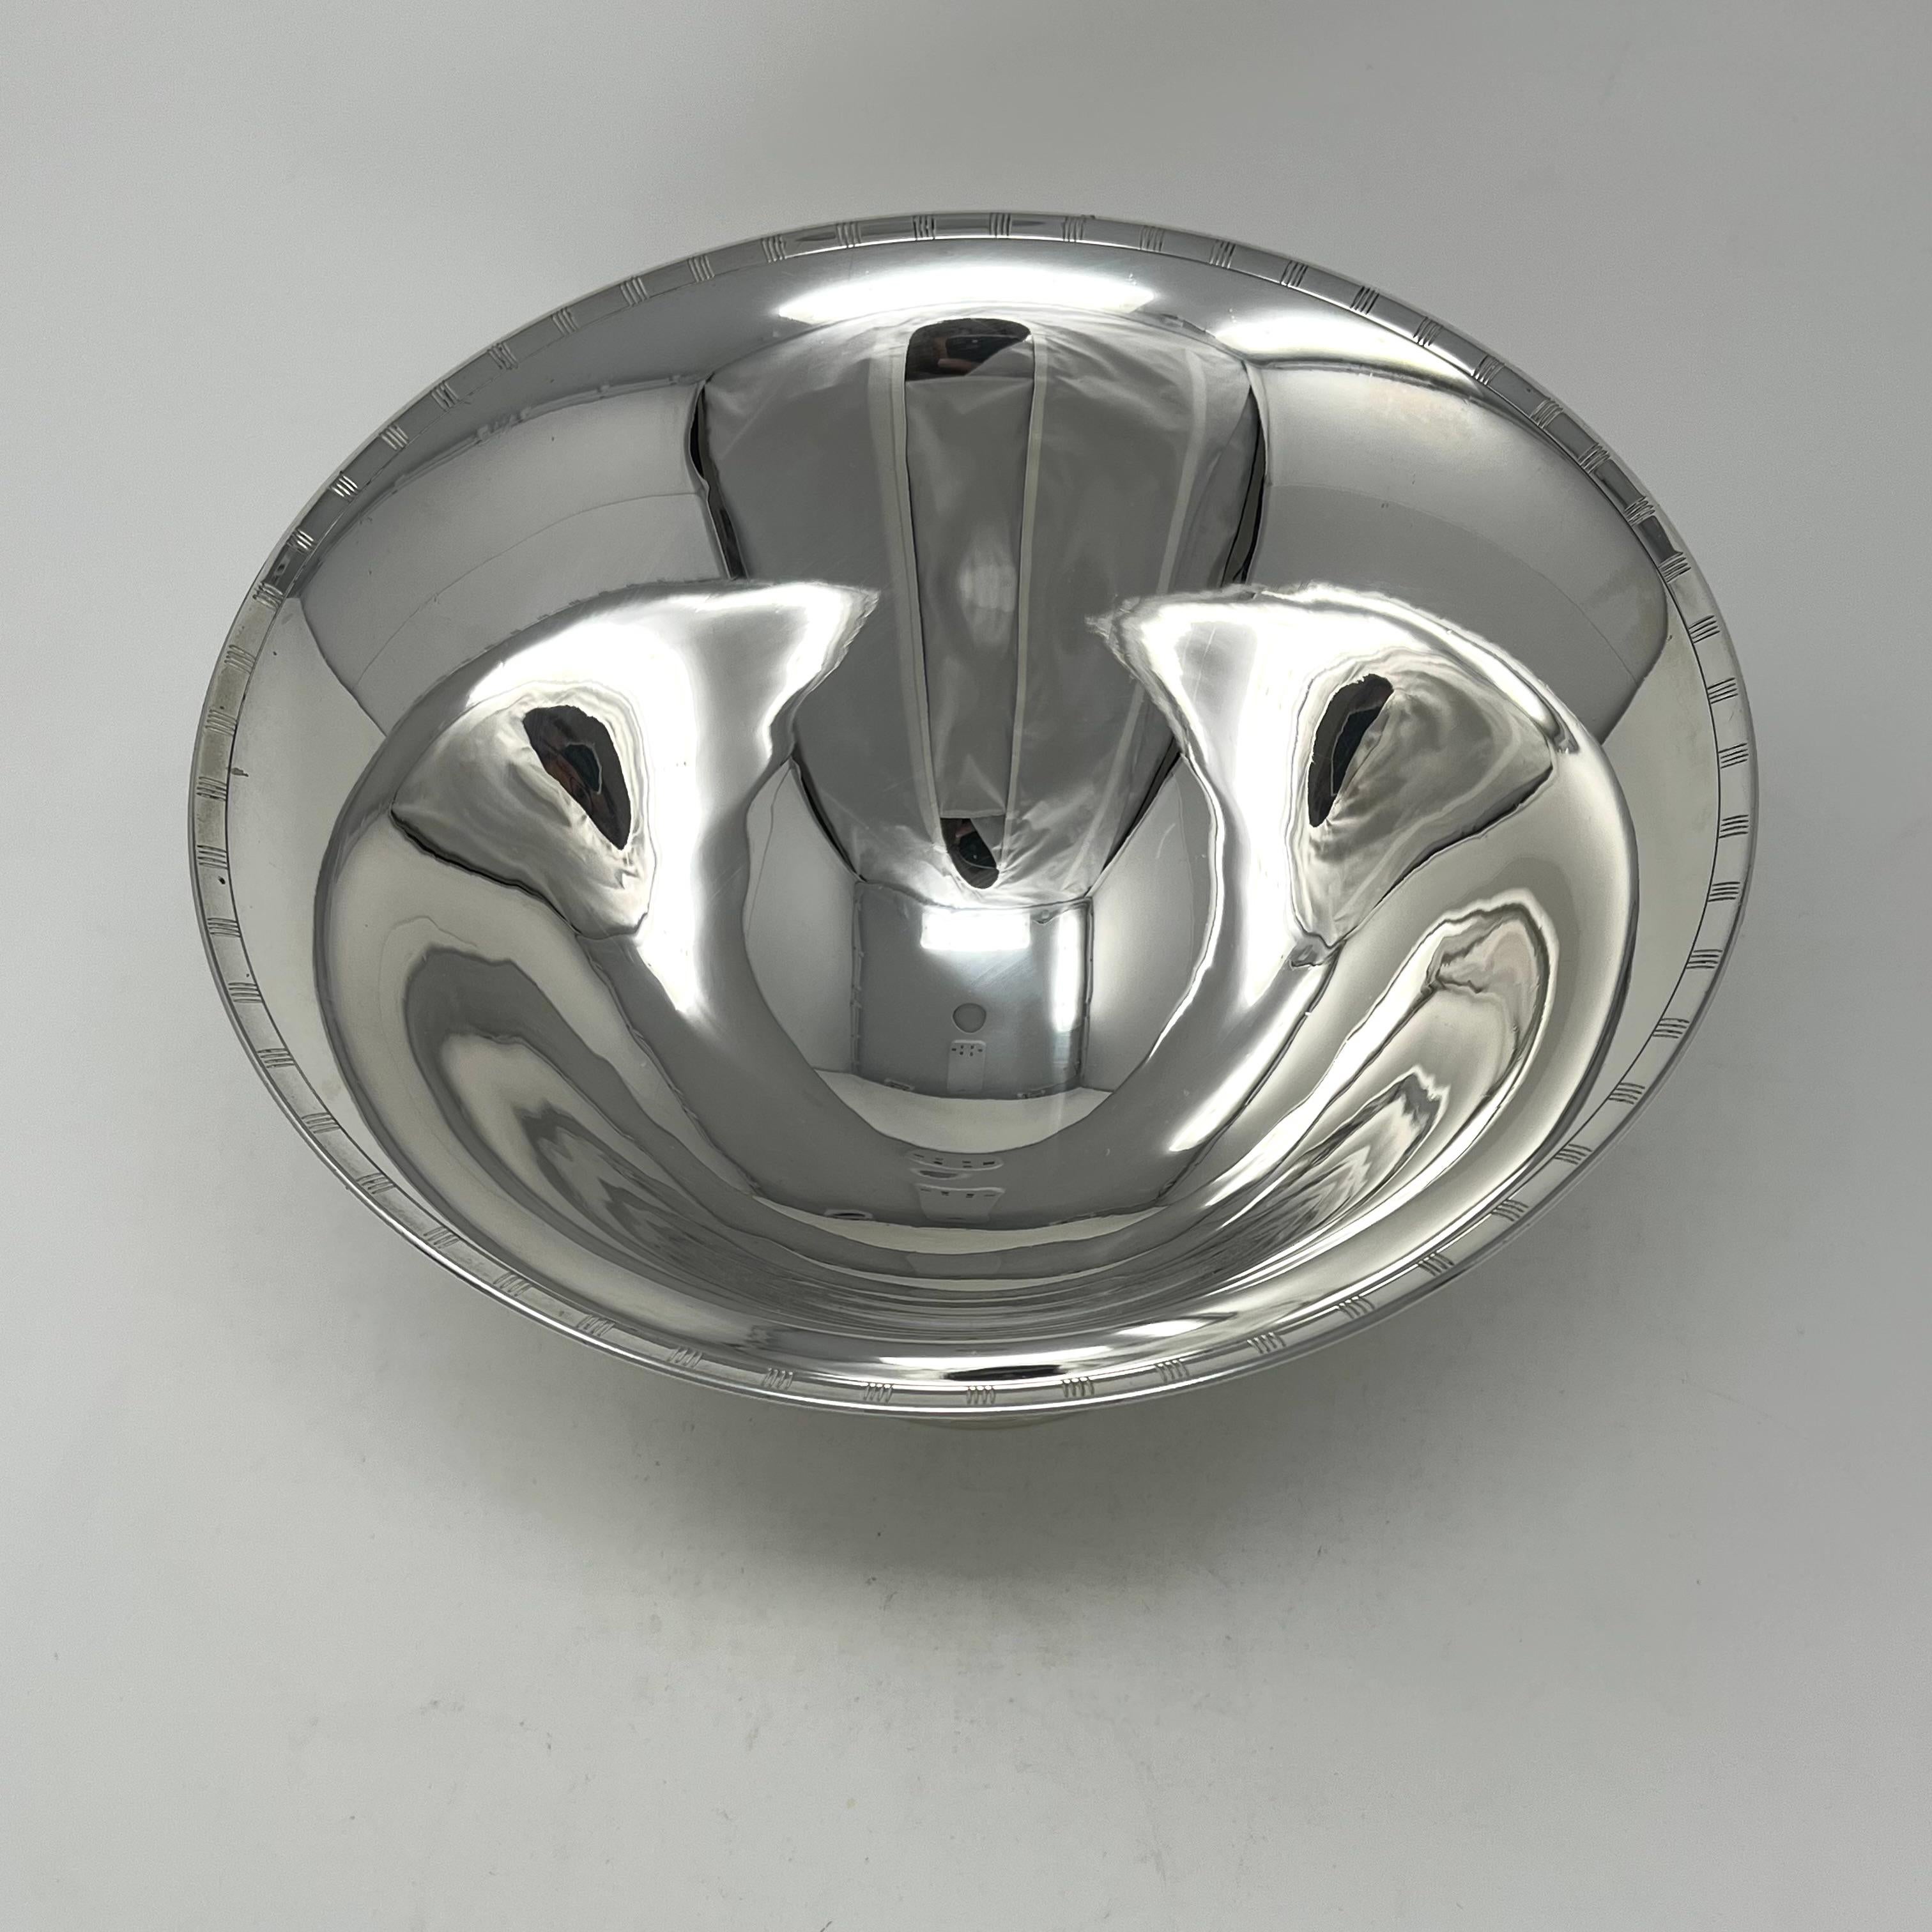 Just Andersen Silver Art Deco Footed Bowl Denmark For Sale 1